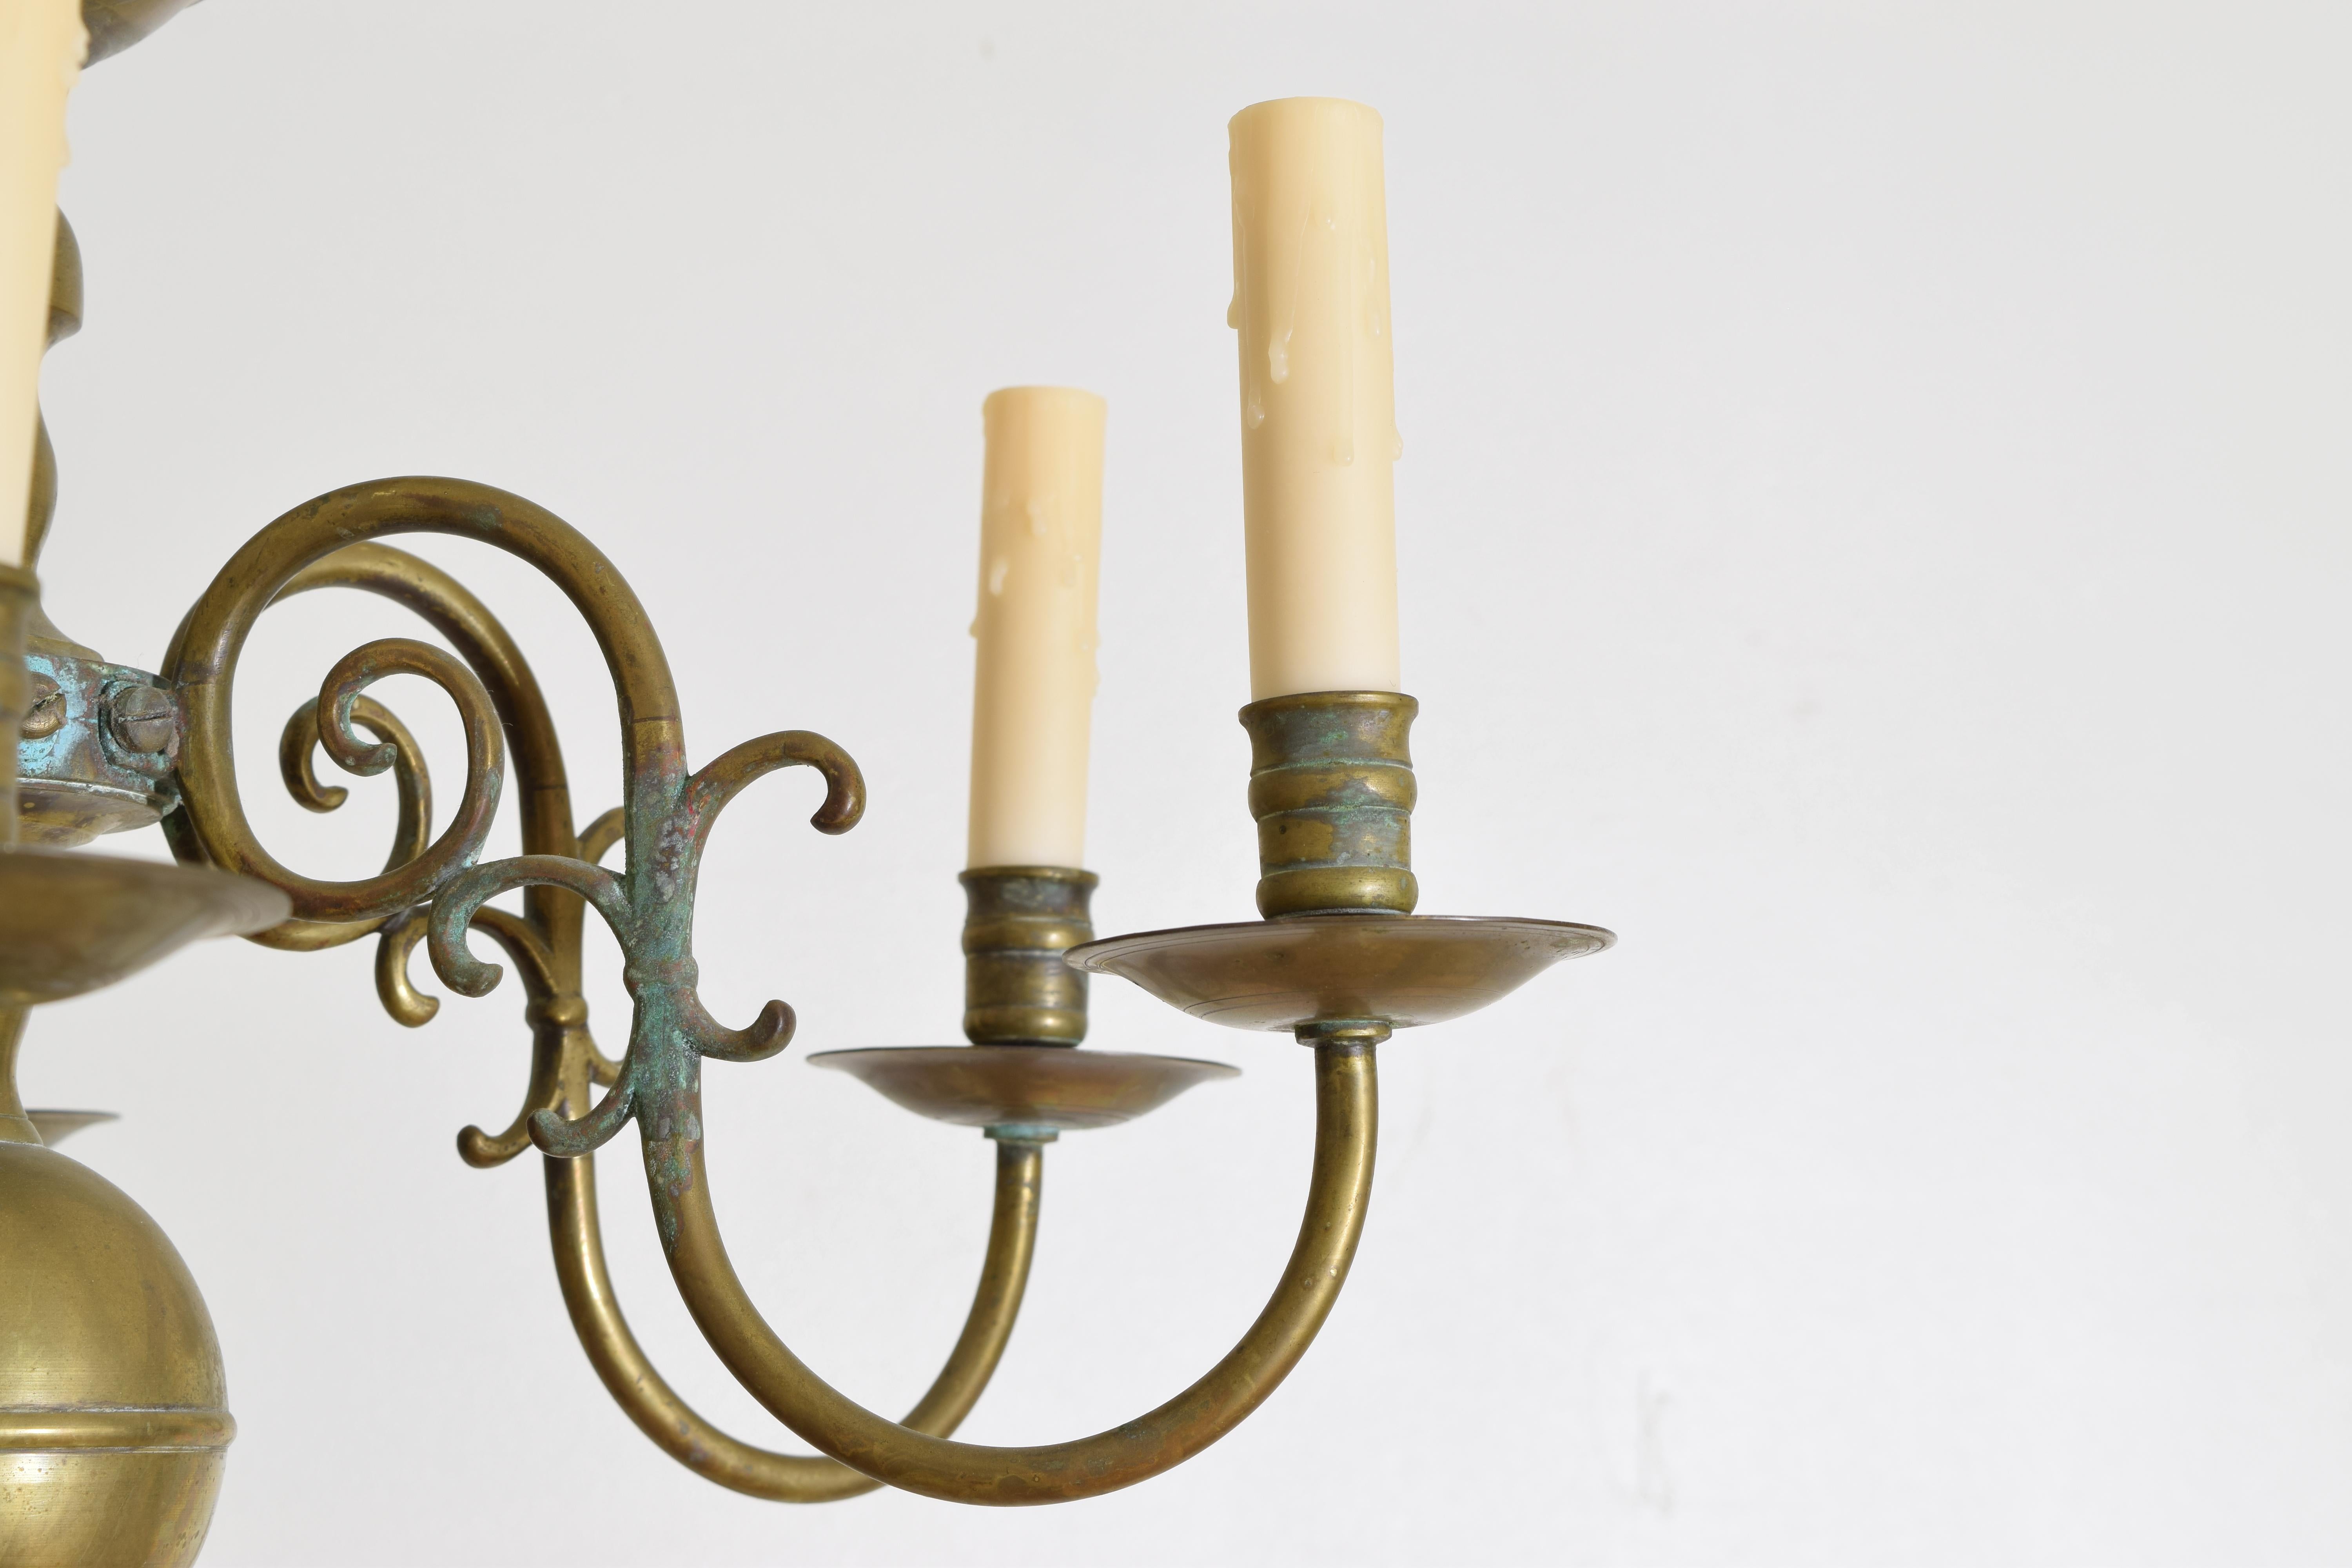 Late 19th Century Dutch or French Patinated Brass 2-Tier 12-Light Chandelier, 2nd half 19th cen. For Sale